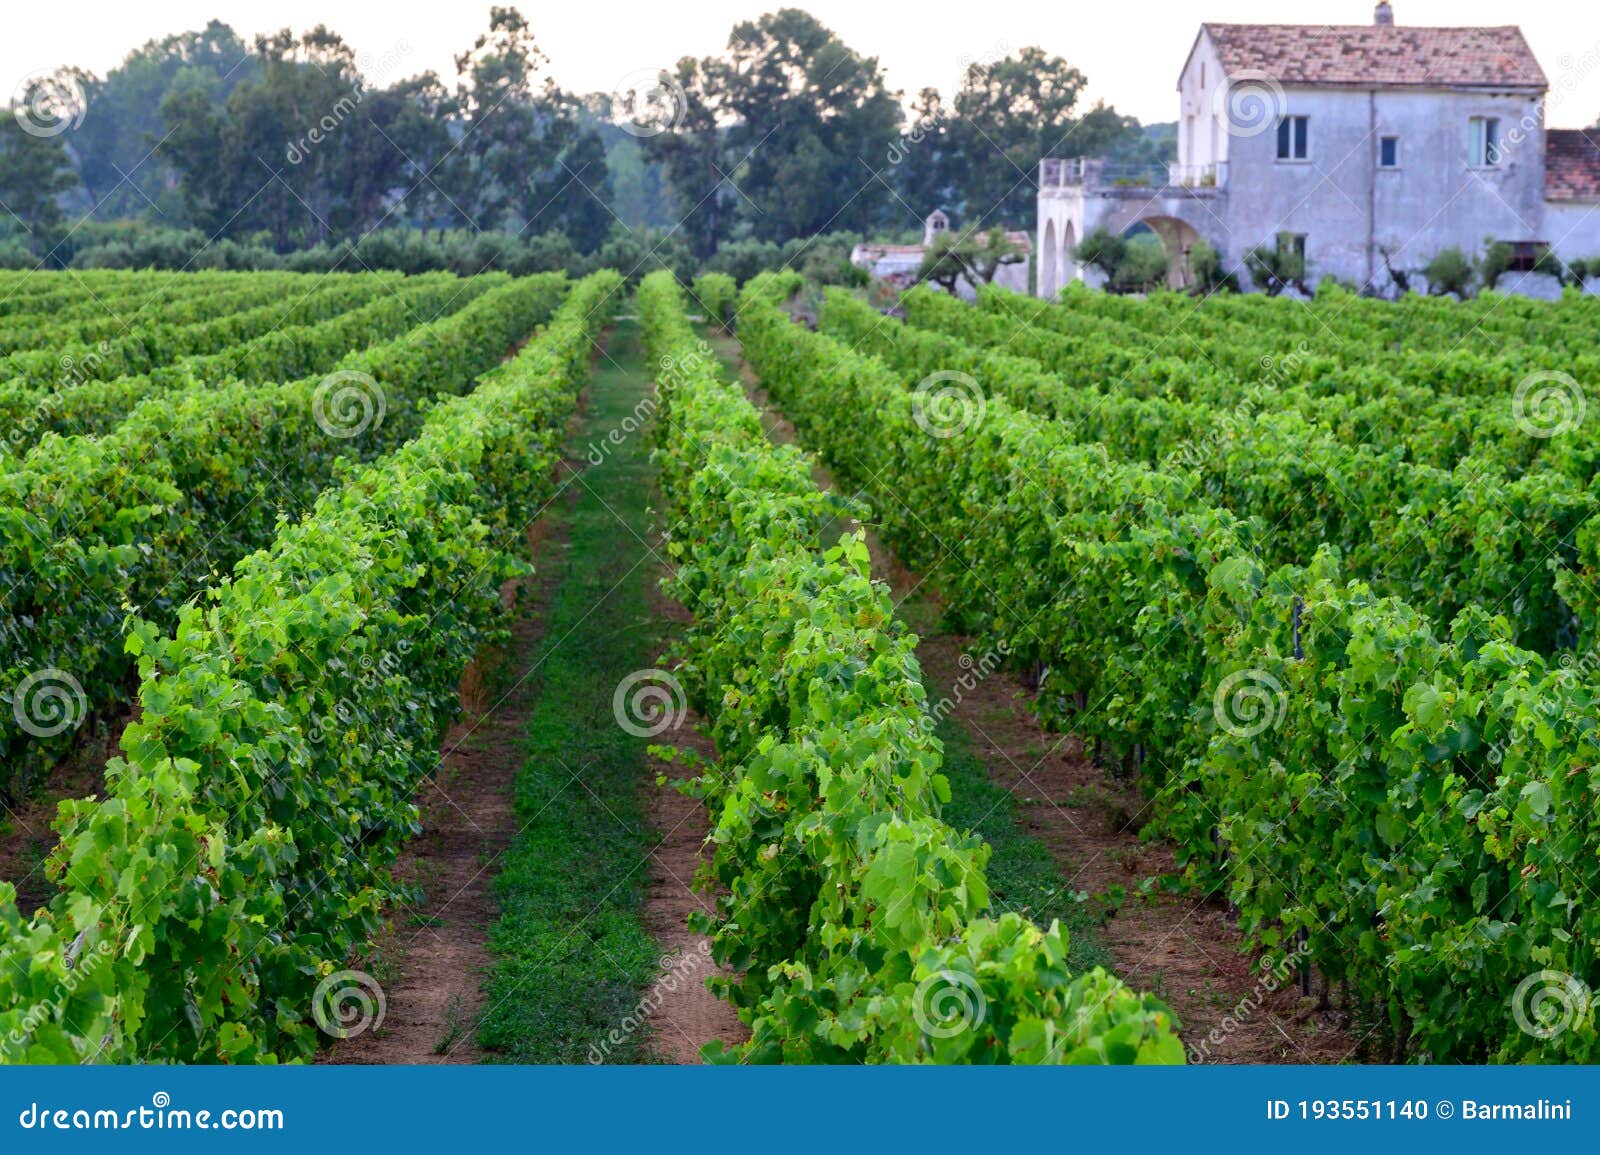 rows with grape plants on vineyards in campania, south of italy